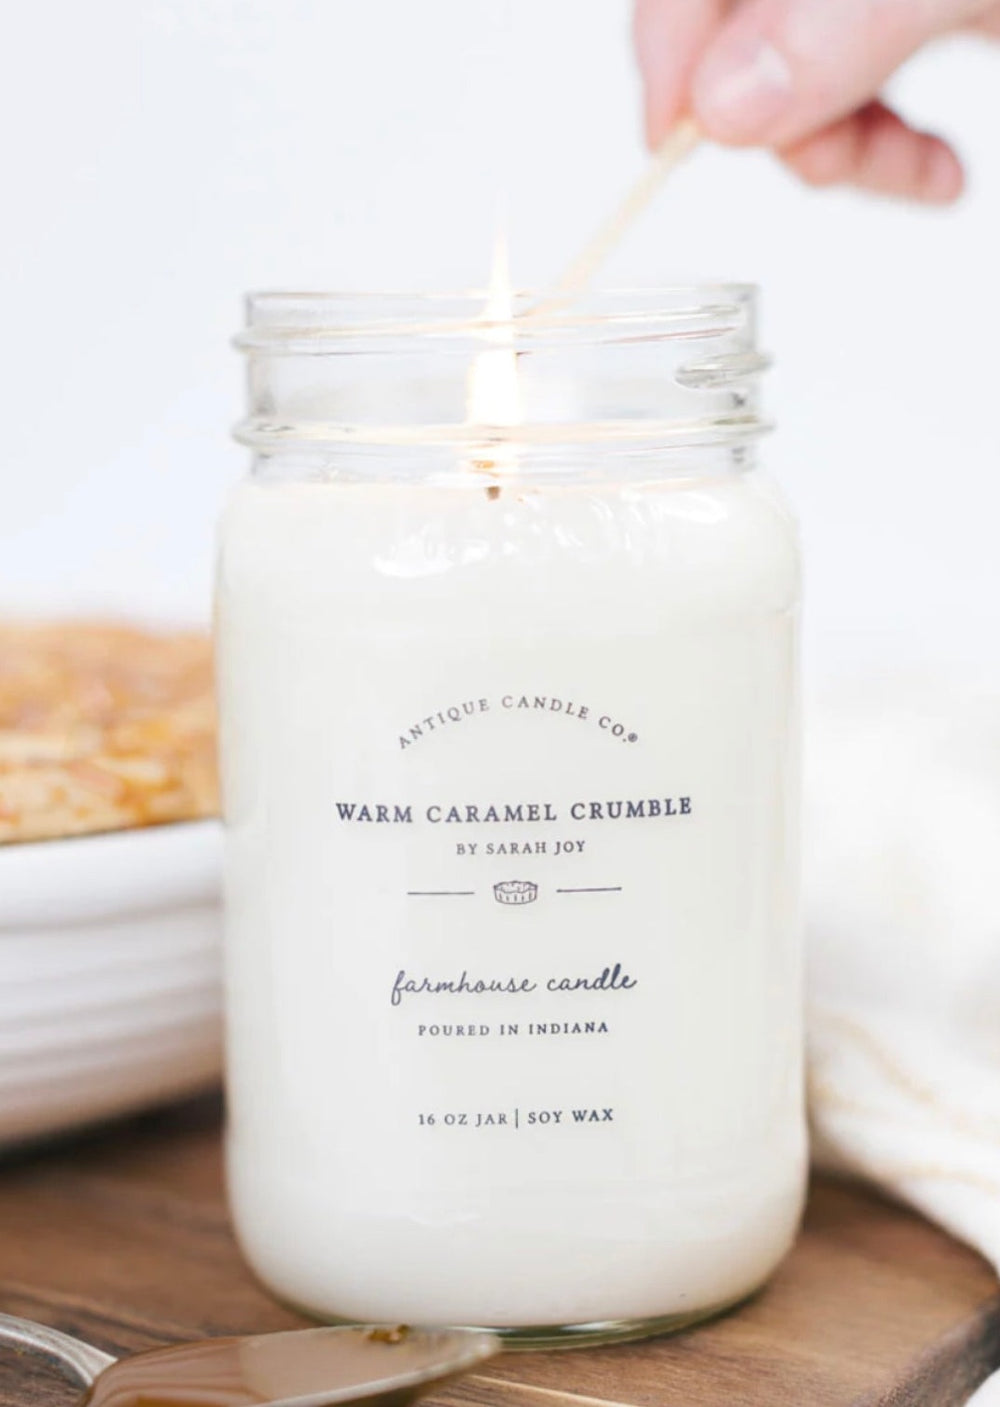 Warm Caramel Crumble 16 oz Farmhouse Mason Jar Soy Wax Candle by Sarah Joy | Antique Candle Co., hand poured in Indiana